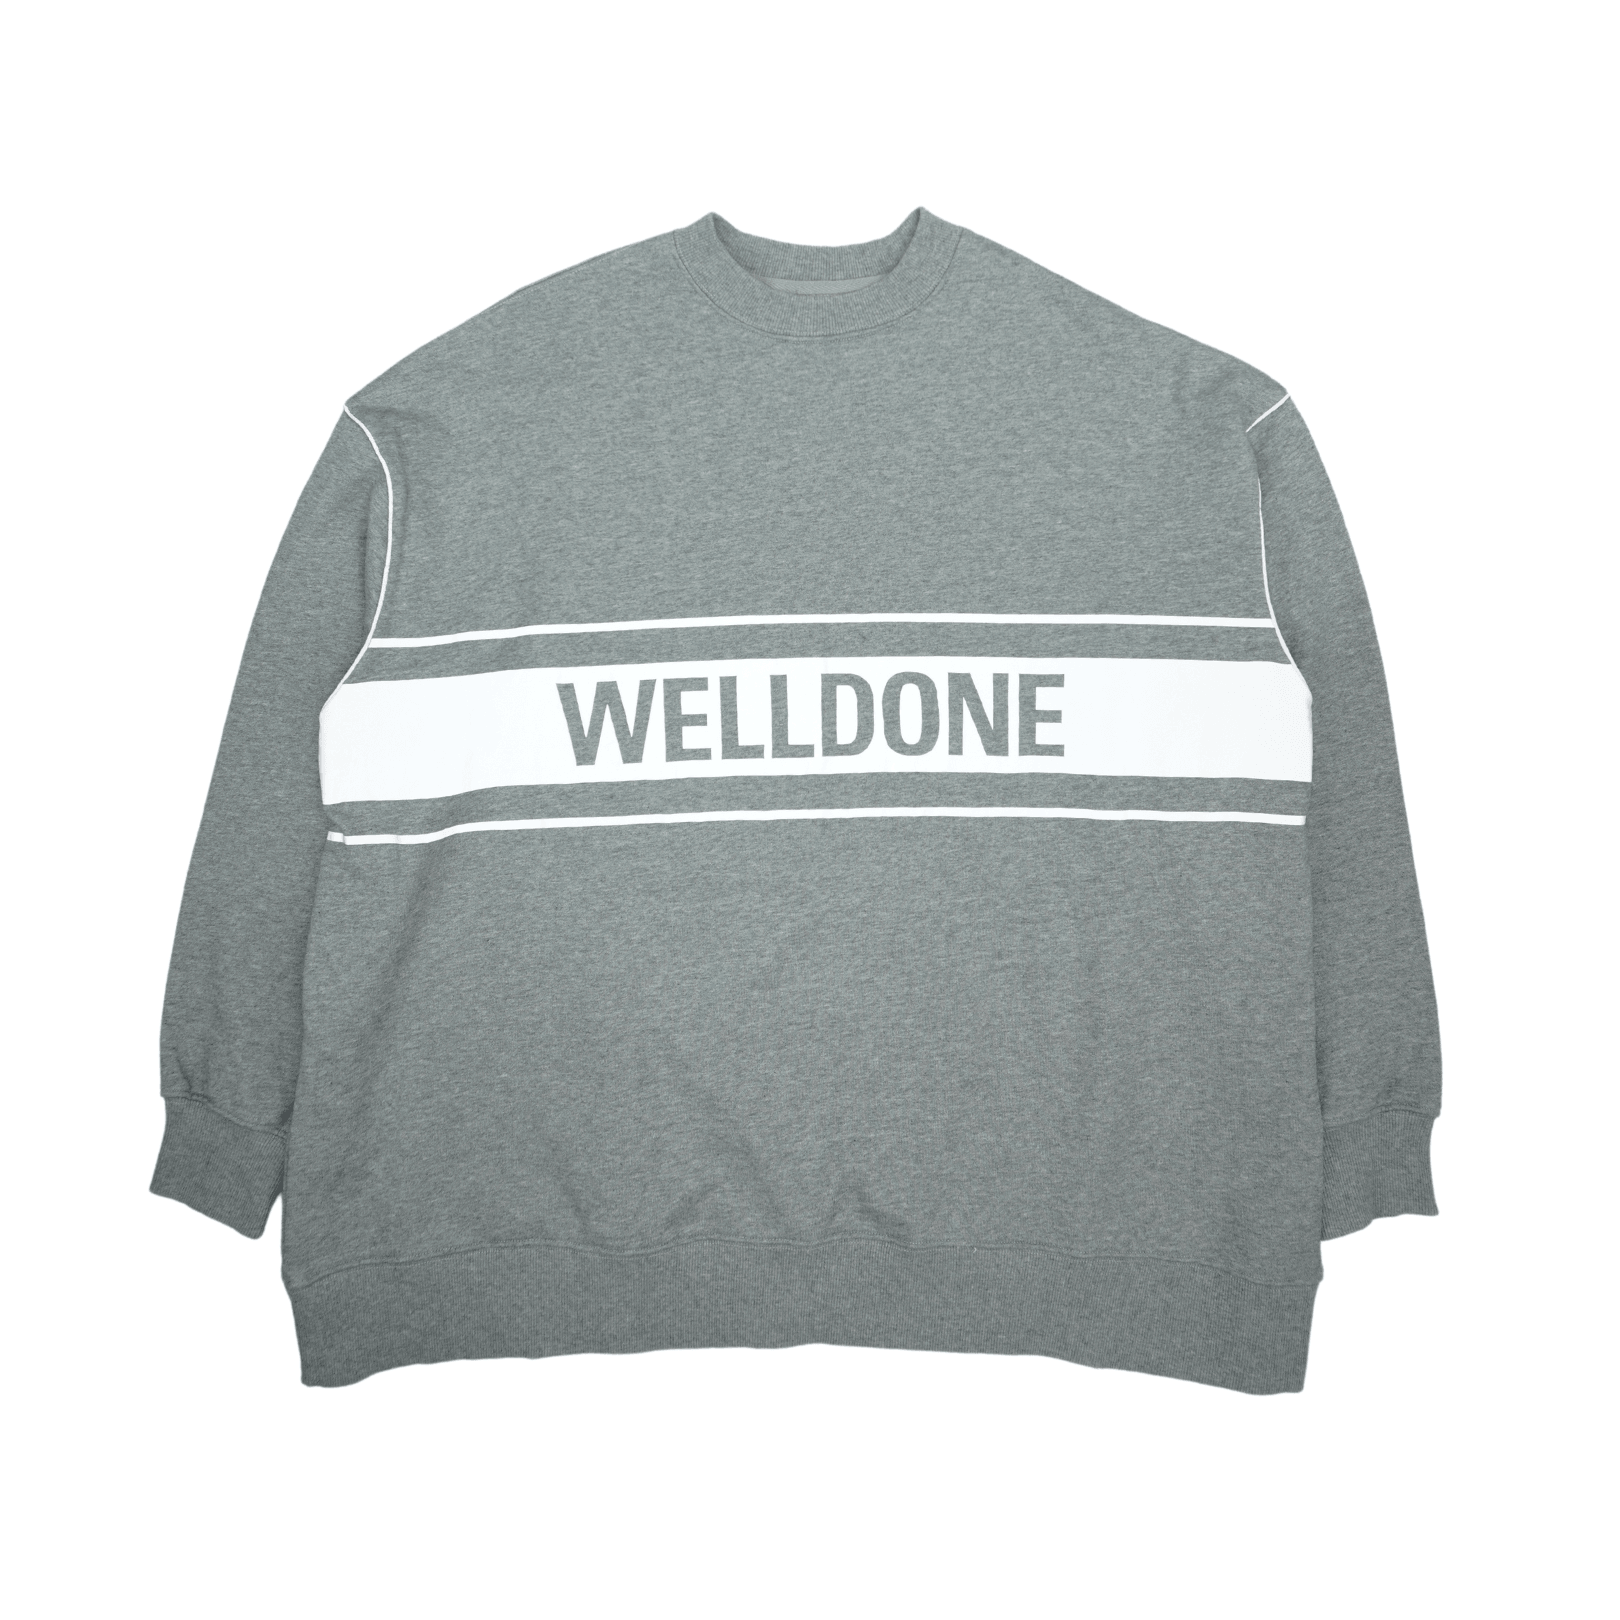 WE11DONE Sweater - Men's S - Fashionably Yours